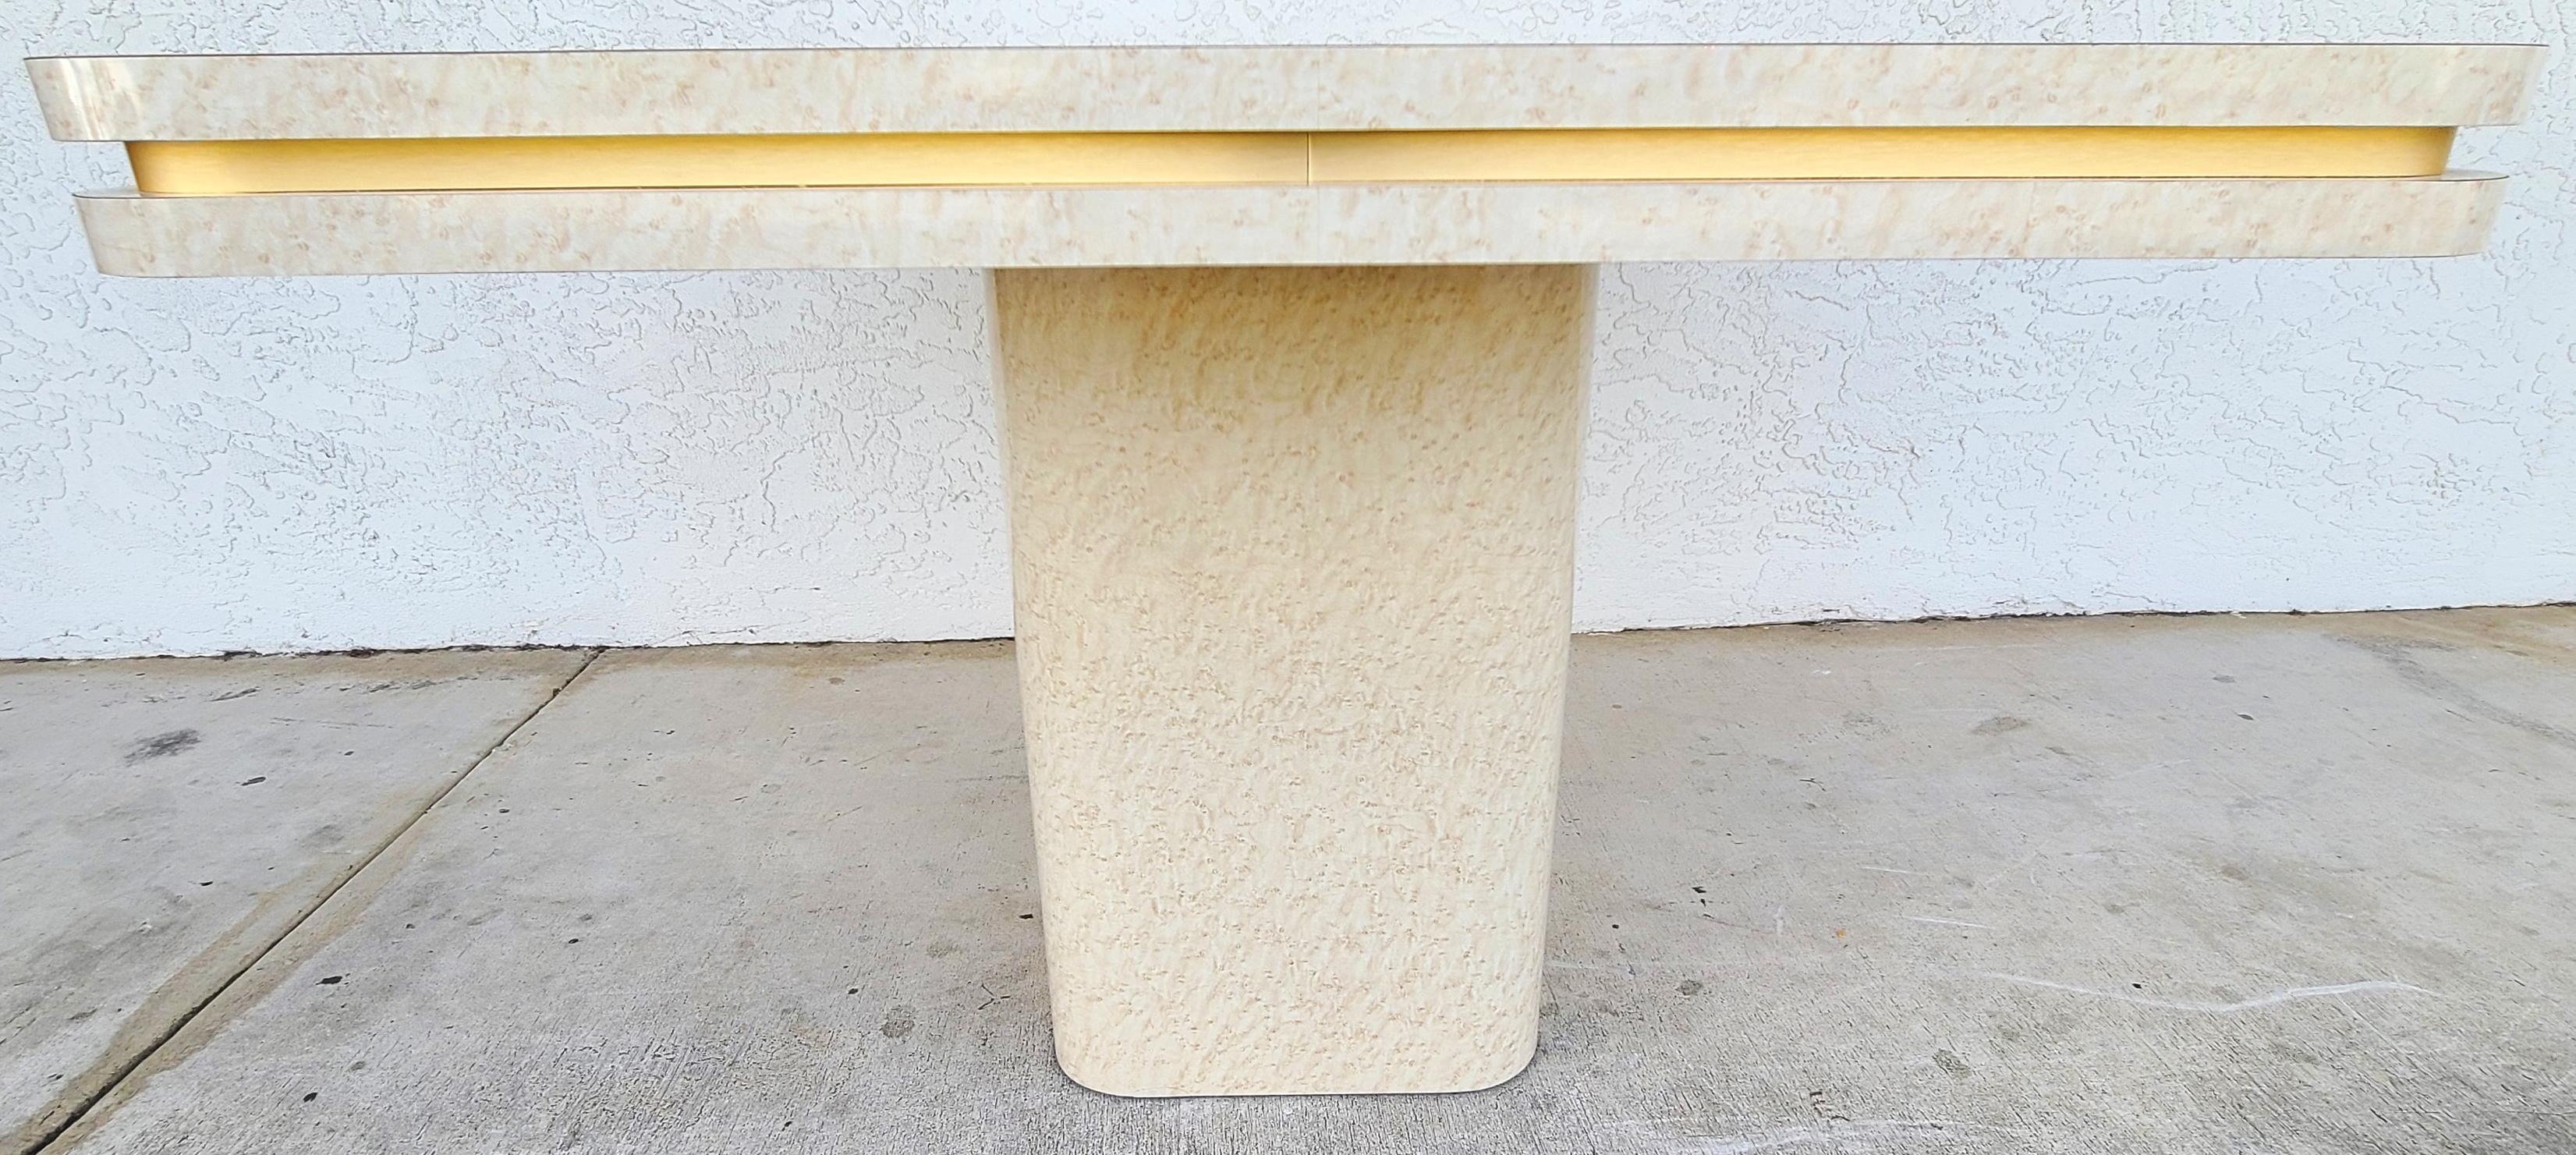 Offering One Of Our Recent Palm Beach Estate Fine Furniture Acquisitions Of A 1960's Mid Century Modern Formica Pedestal Dining Game Table With Recessed Gold Trim around the side rims.

We had 2 of these at the time we made the listing. One of